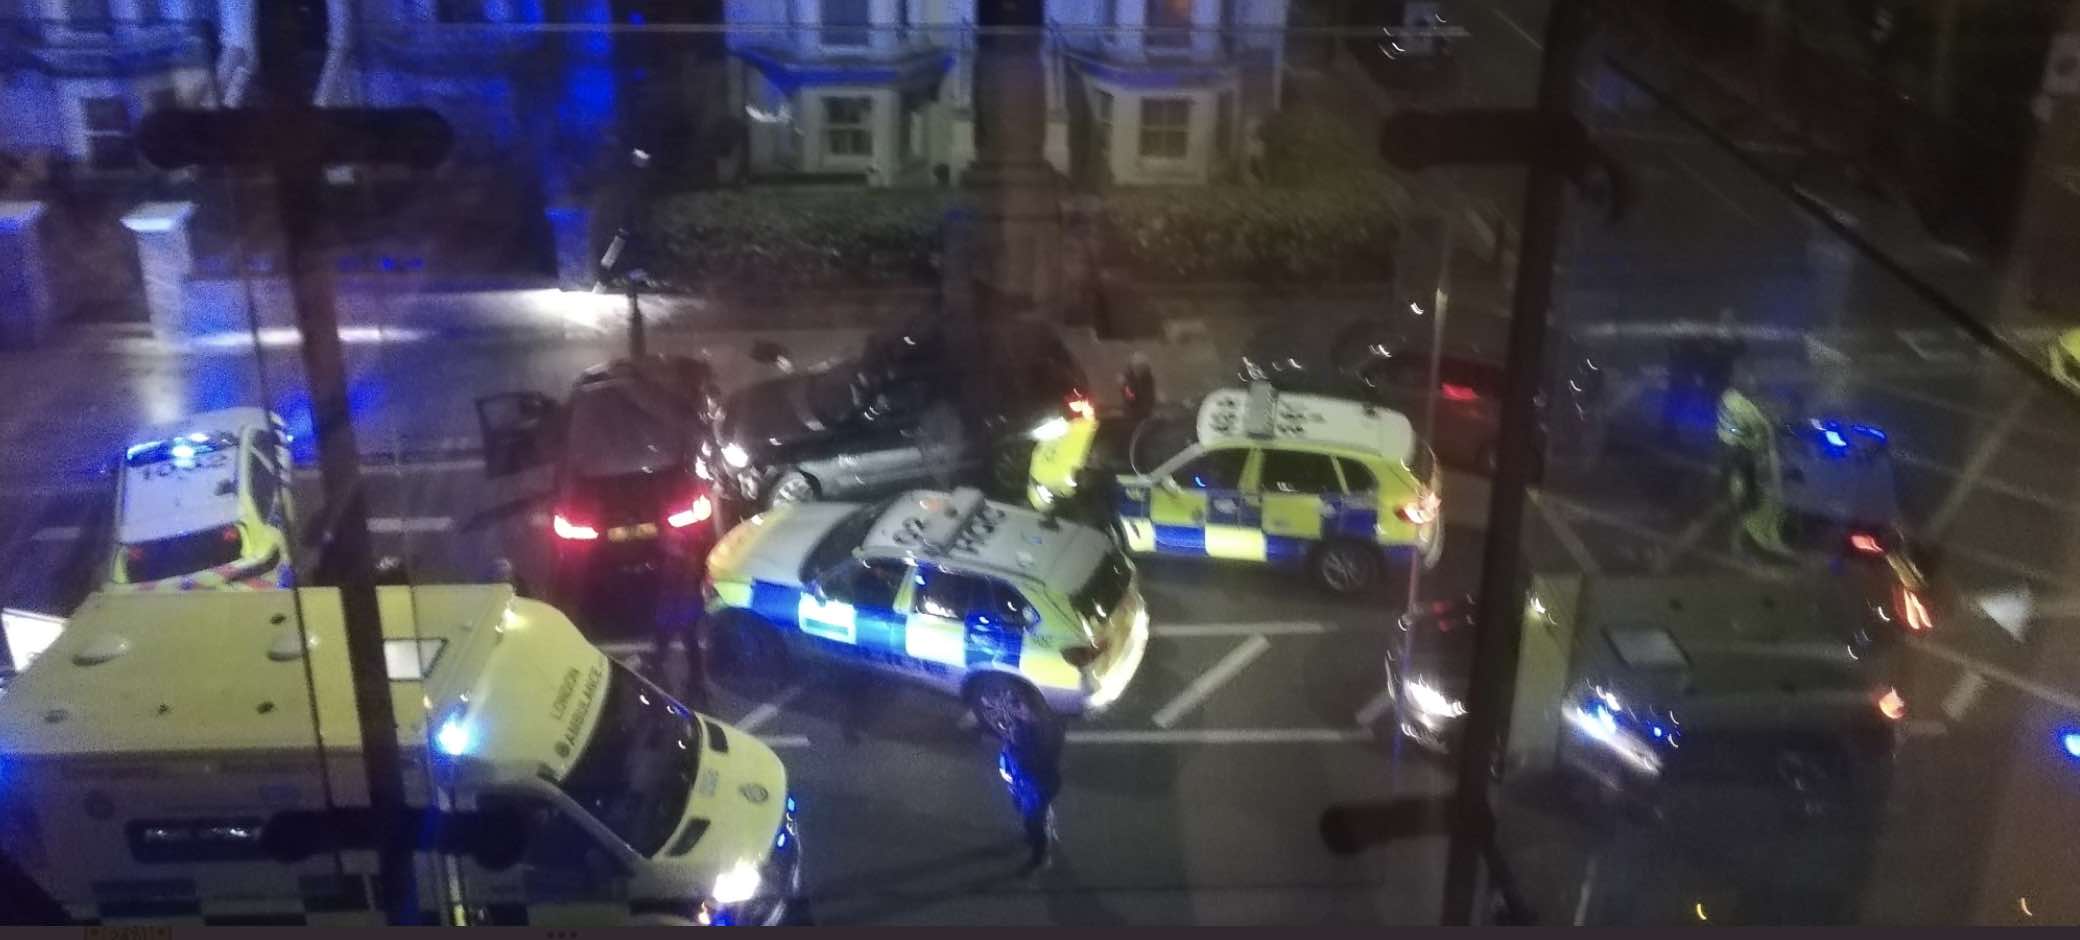 Armed Police Help To Treat Man With Serious Self-inflicted Injuries In Chiswick Vehicle Stop